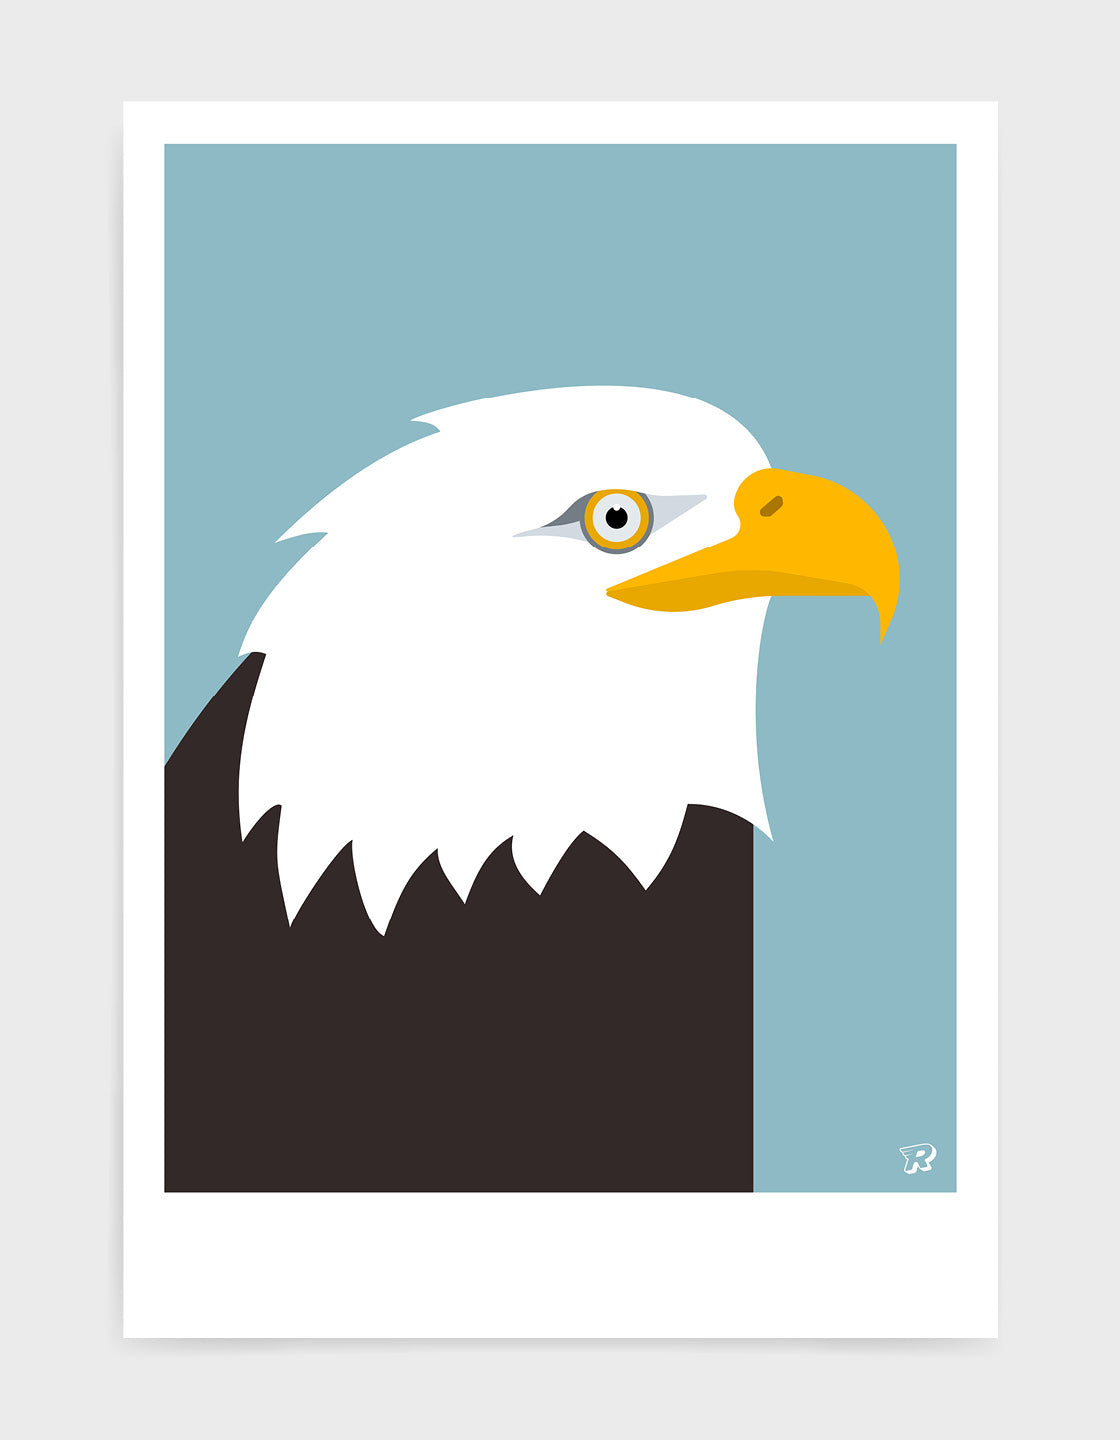 art print of an American bald eagle in profile against a light blue background